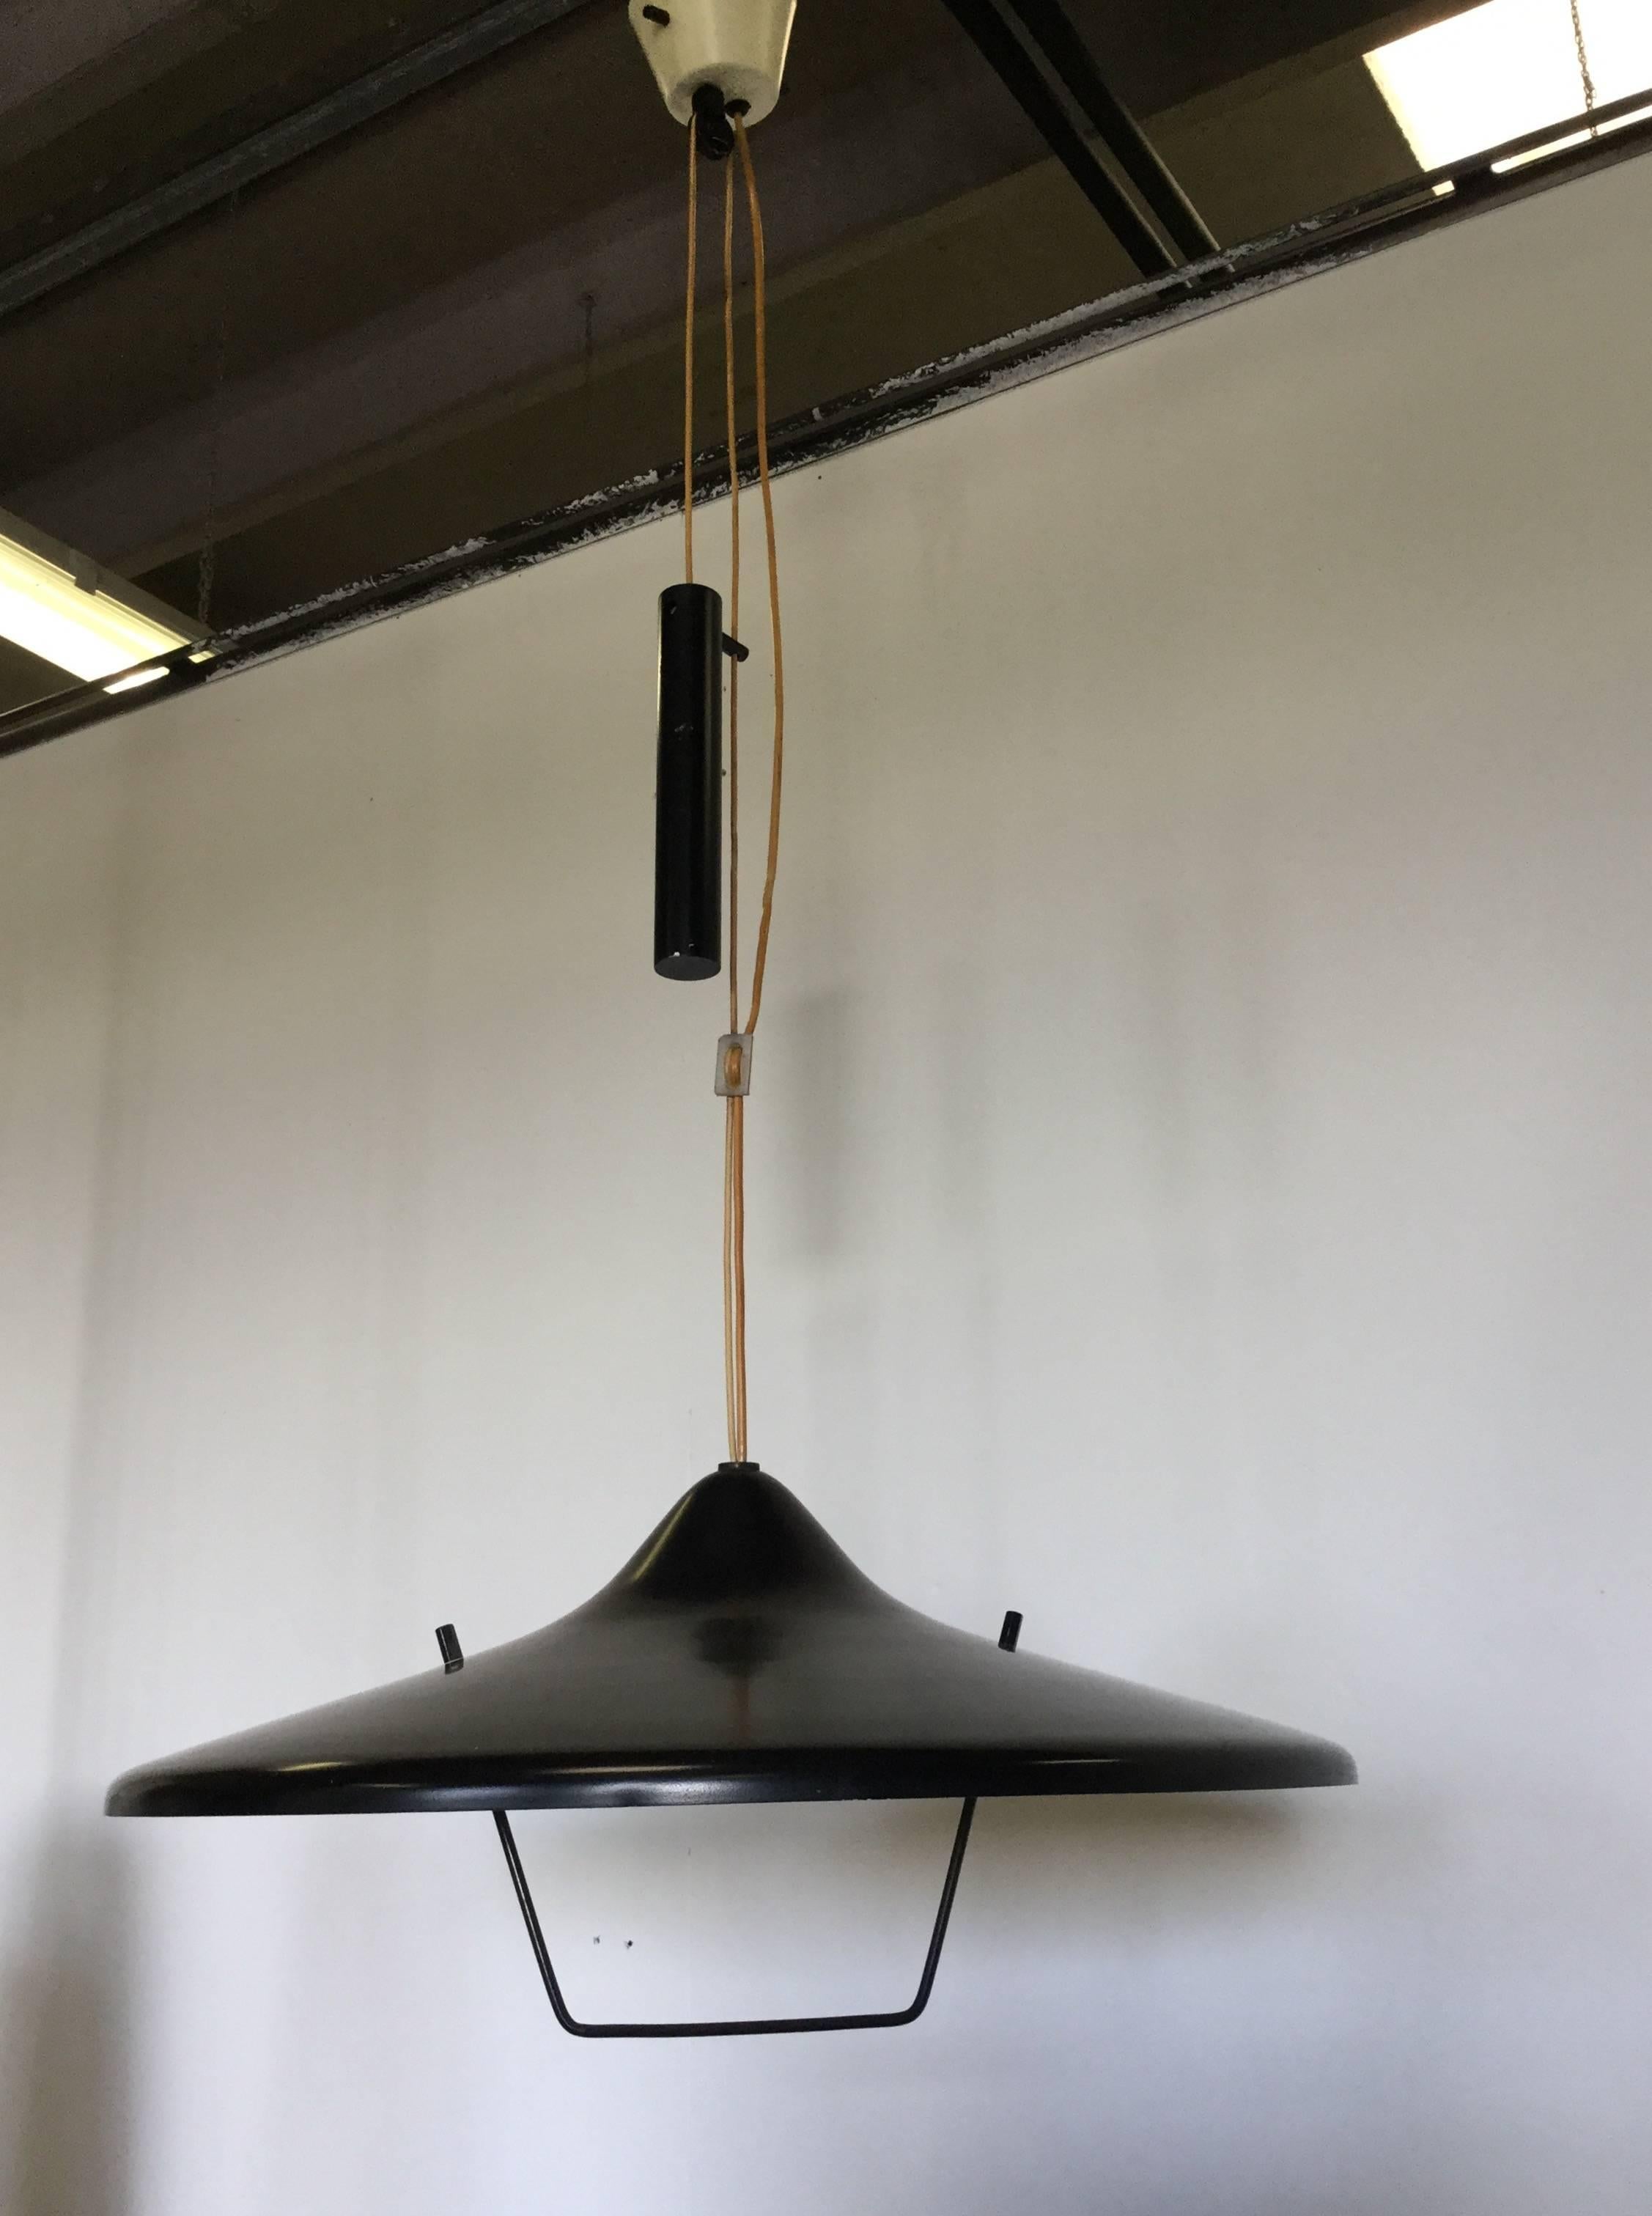 Chandelier with pulley and counterweight that permit the adjustable movement up and down, the diffuser is a large black lacquered metal cup with its own hand to move, yellow Stilnovo label under the cup 
Manufactured by Stilnovo in 1950.